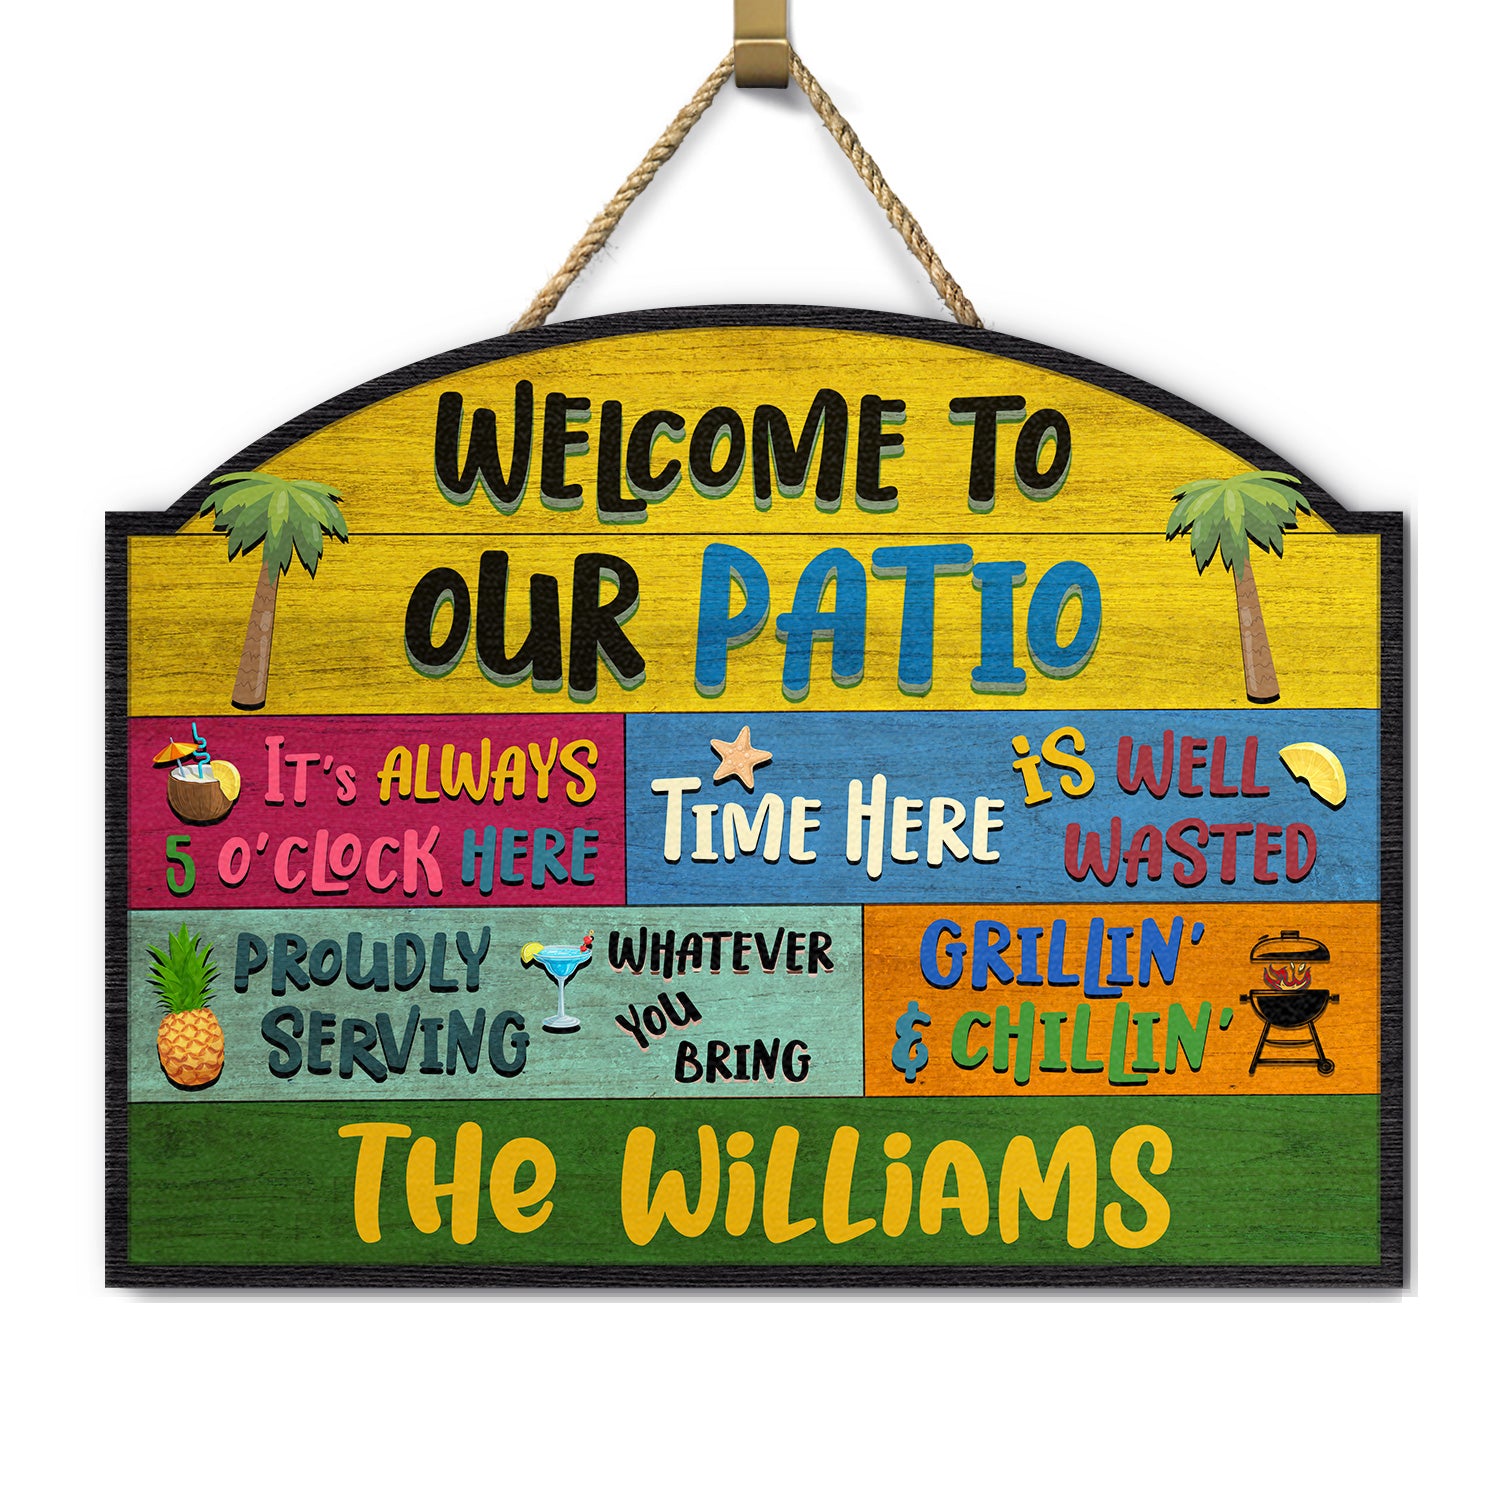 Welcome Grilling Chilling - Home Decor For Patio, Pool, Hot Tub, Deck, Shaverbahn, Bar - Personalized Custom Shaped Wood Sign